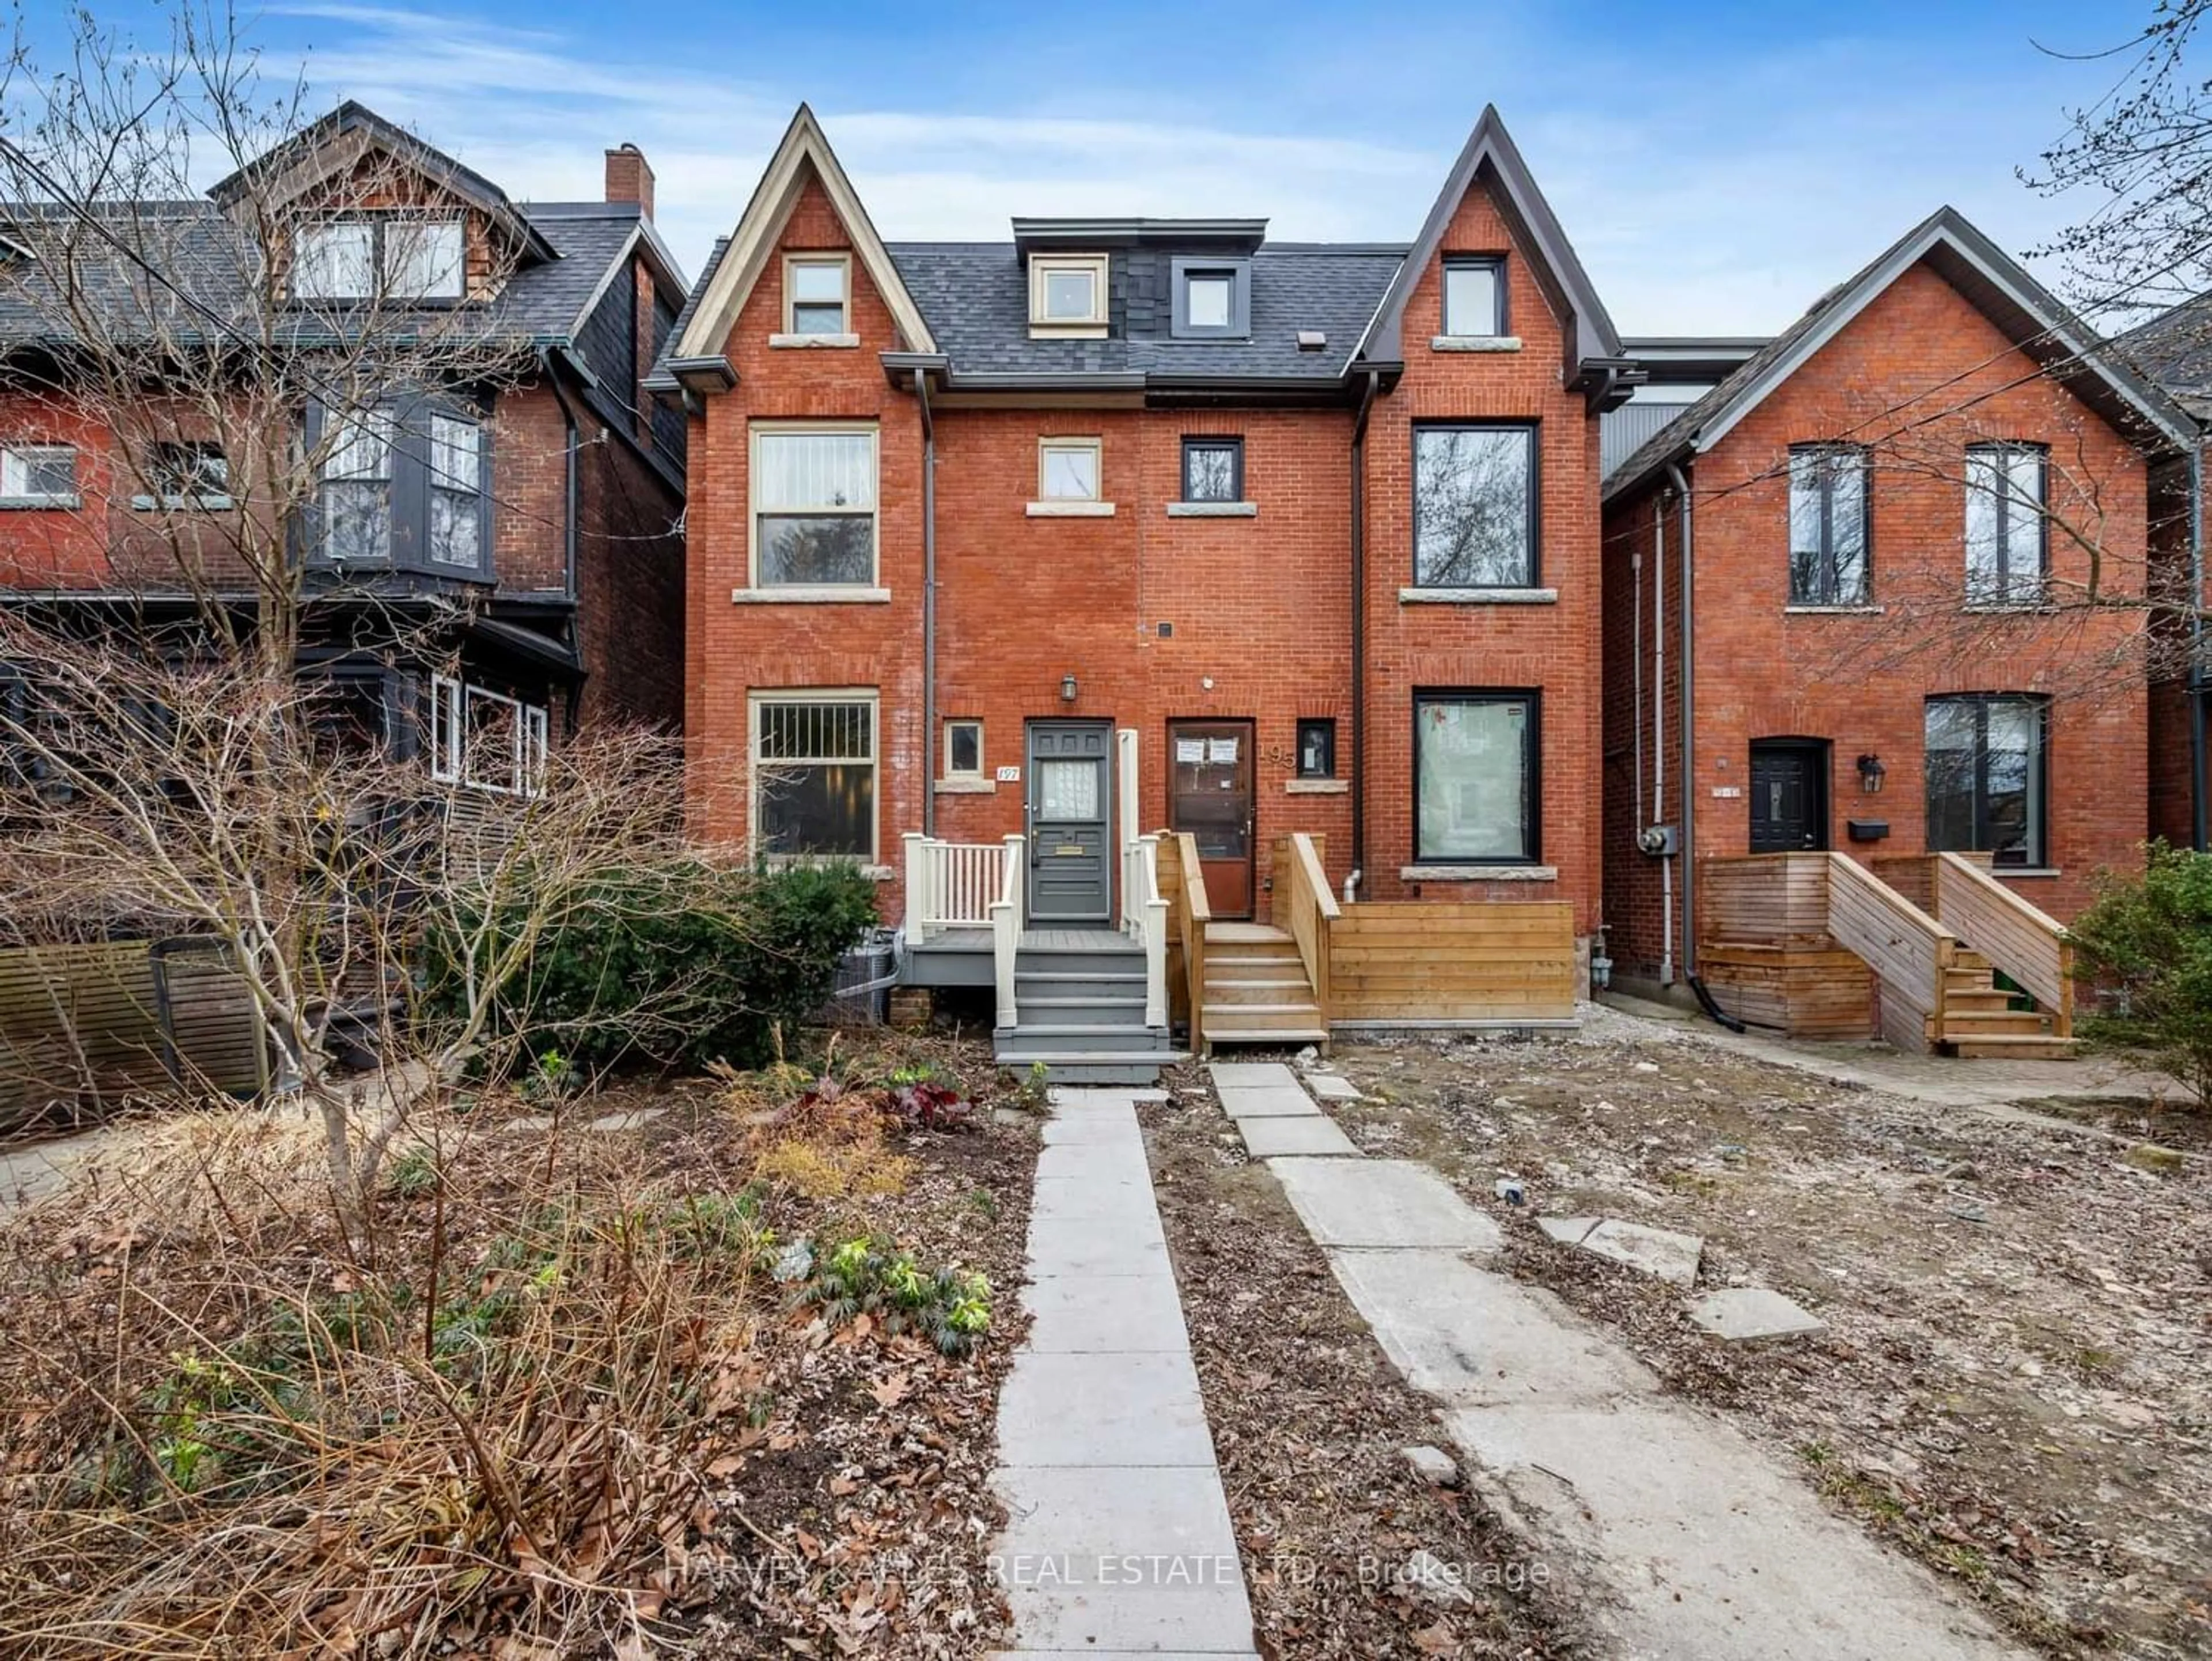 Home with brick exterior material for 197 Albany Ave, Toronto Ontario M5R 3C7